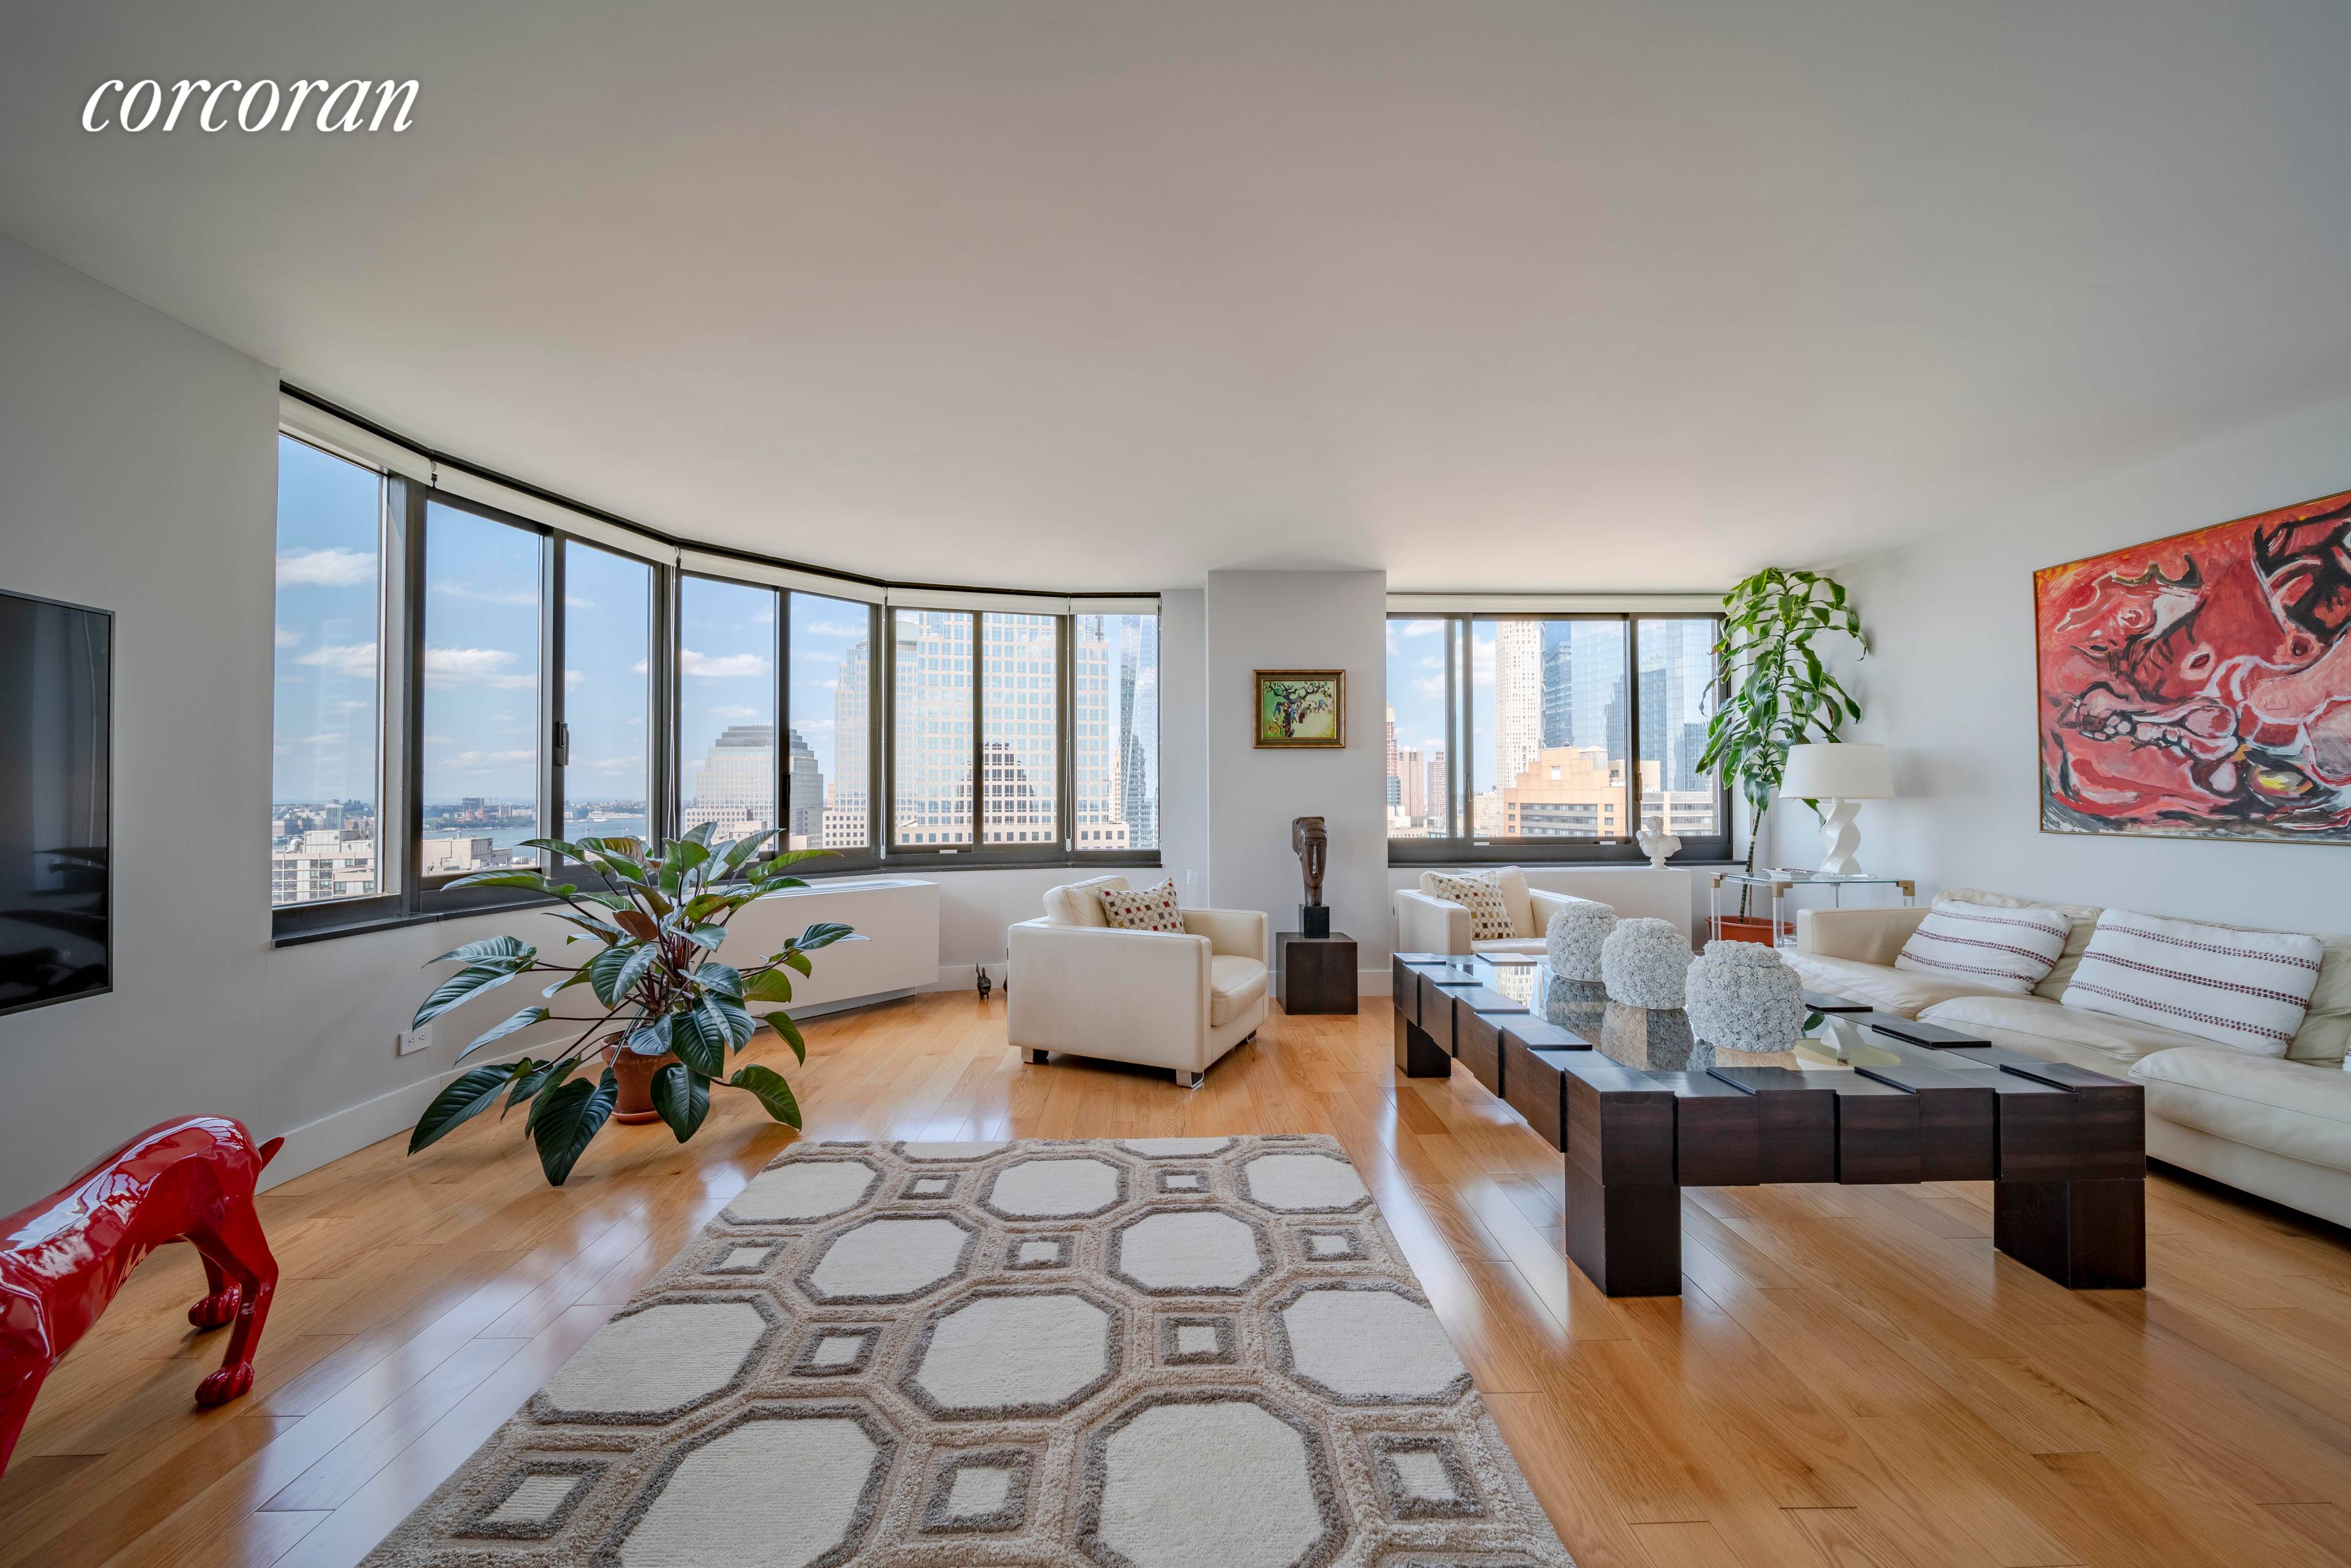 SHOWING BY APPOINTMENT ONLY 24 HOUR NOTICE REQUIRED As Featured in The New York Times and Wall Street Journal, located in the heart of Battery Park City, a predominantly residential, ...